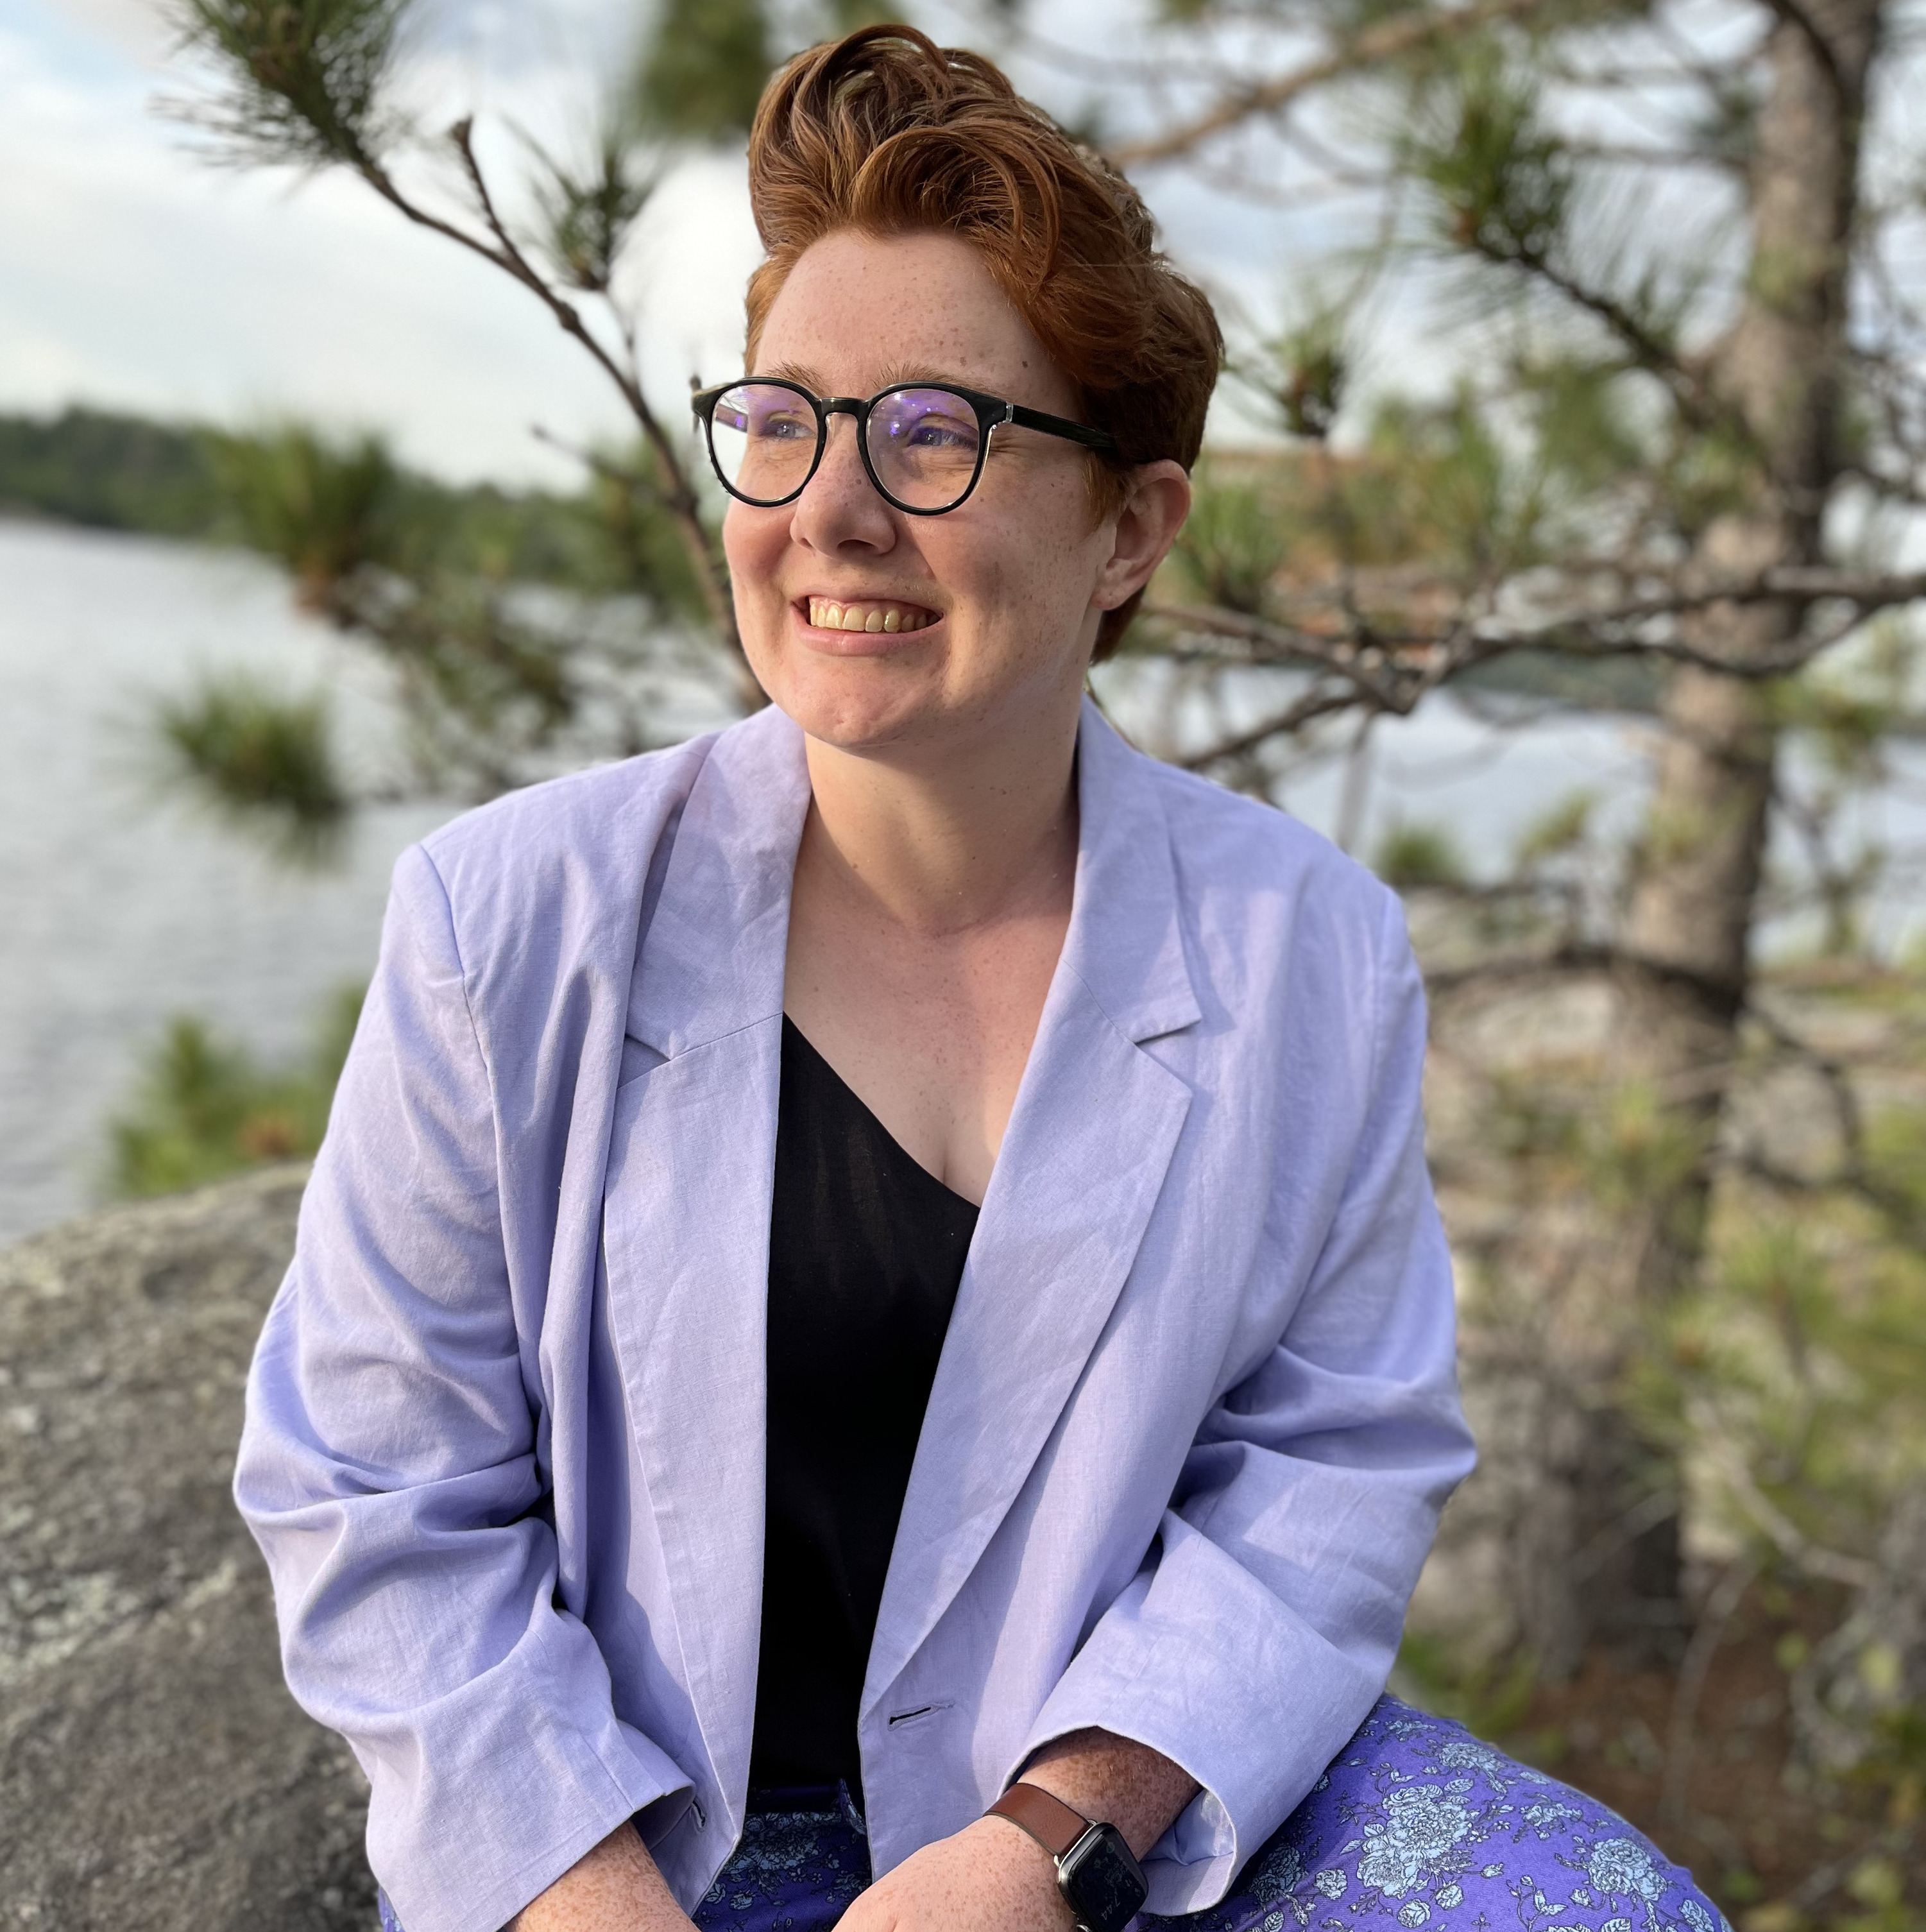 Emma McDonnell, a white woman with short red hair and circular black glassess sits on a rock with a lake blurred in the background behind her, wearing a lavender blazer, black tank top, and floral patterned purple pants. She is not looking directly at the camera, but is smiling looking out.